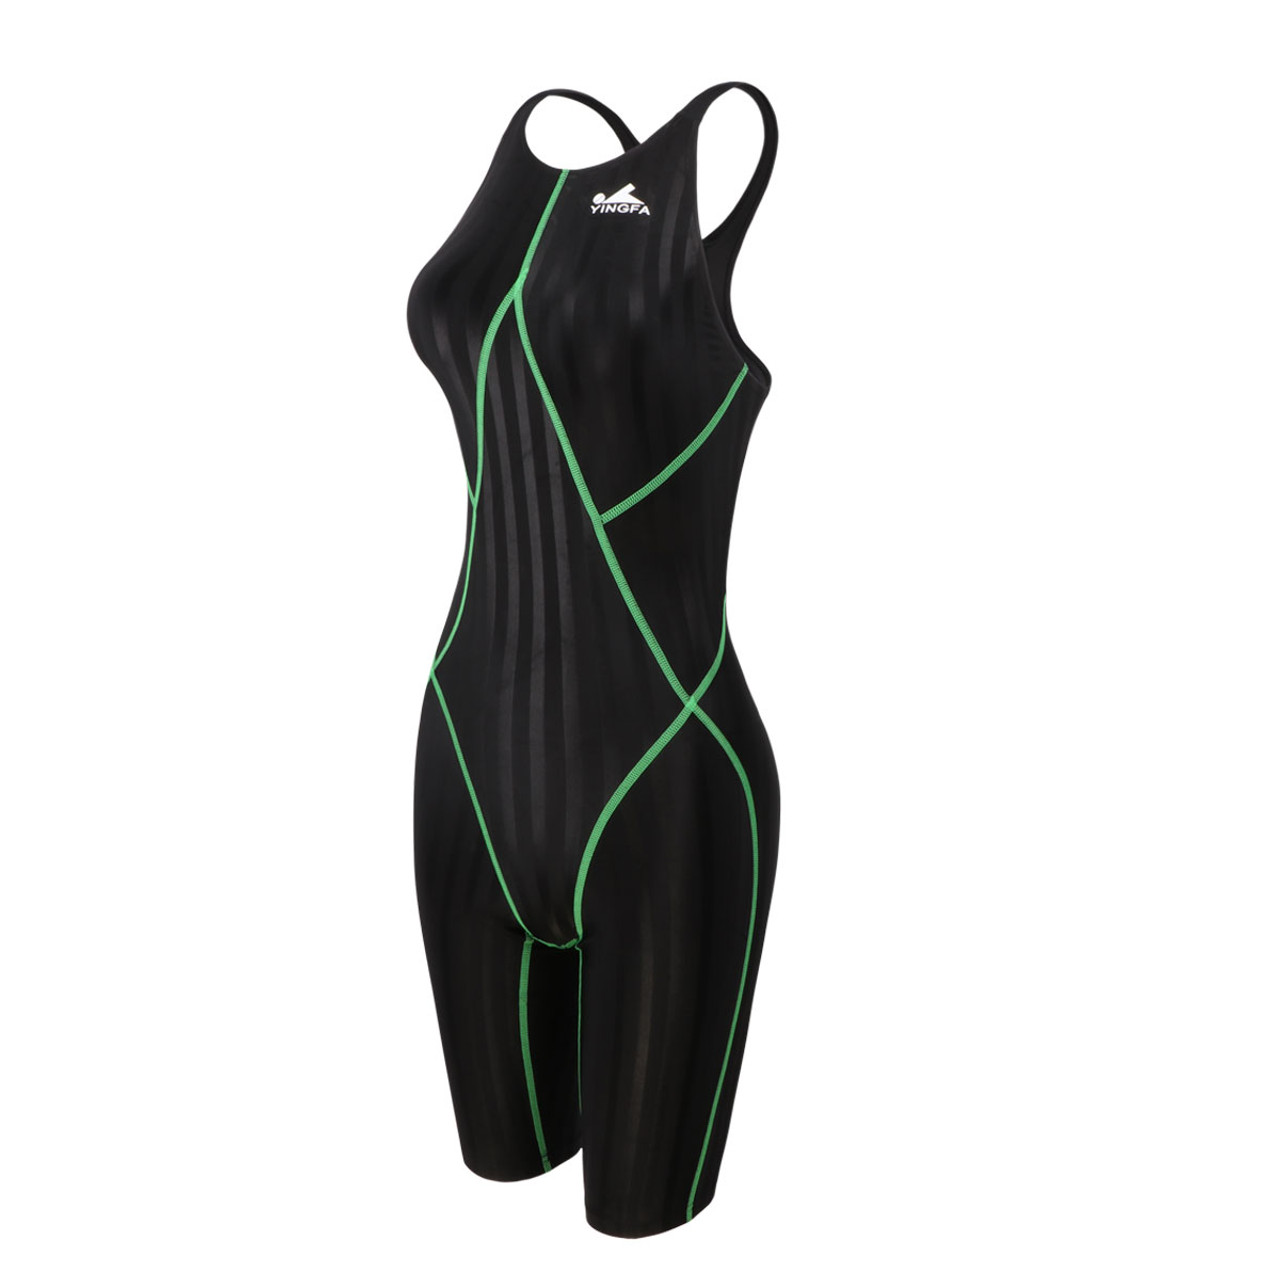 FINA approved swimsuit racing & training swimsuits, Yingfa 921-1 black  swimsuits